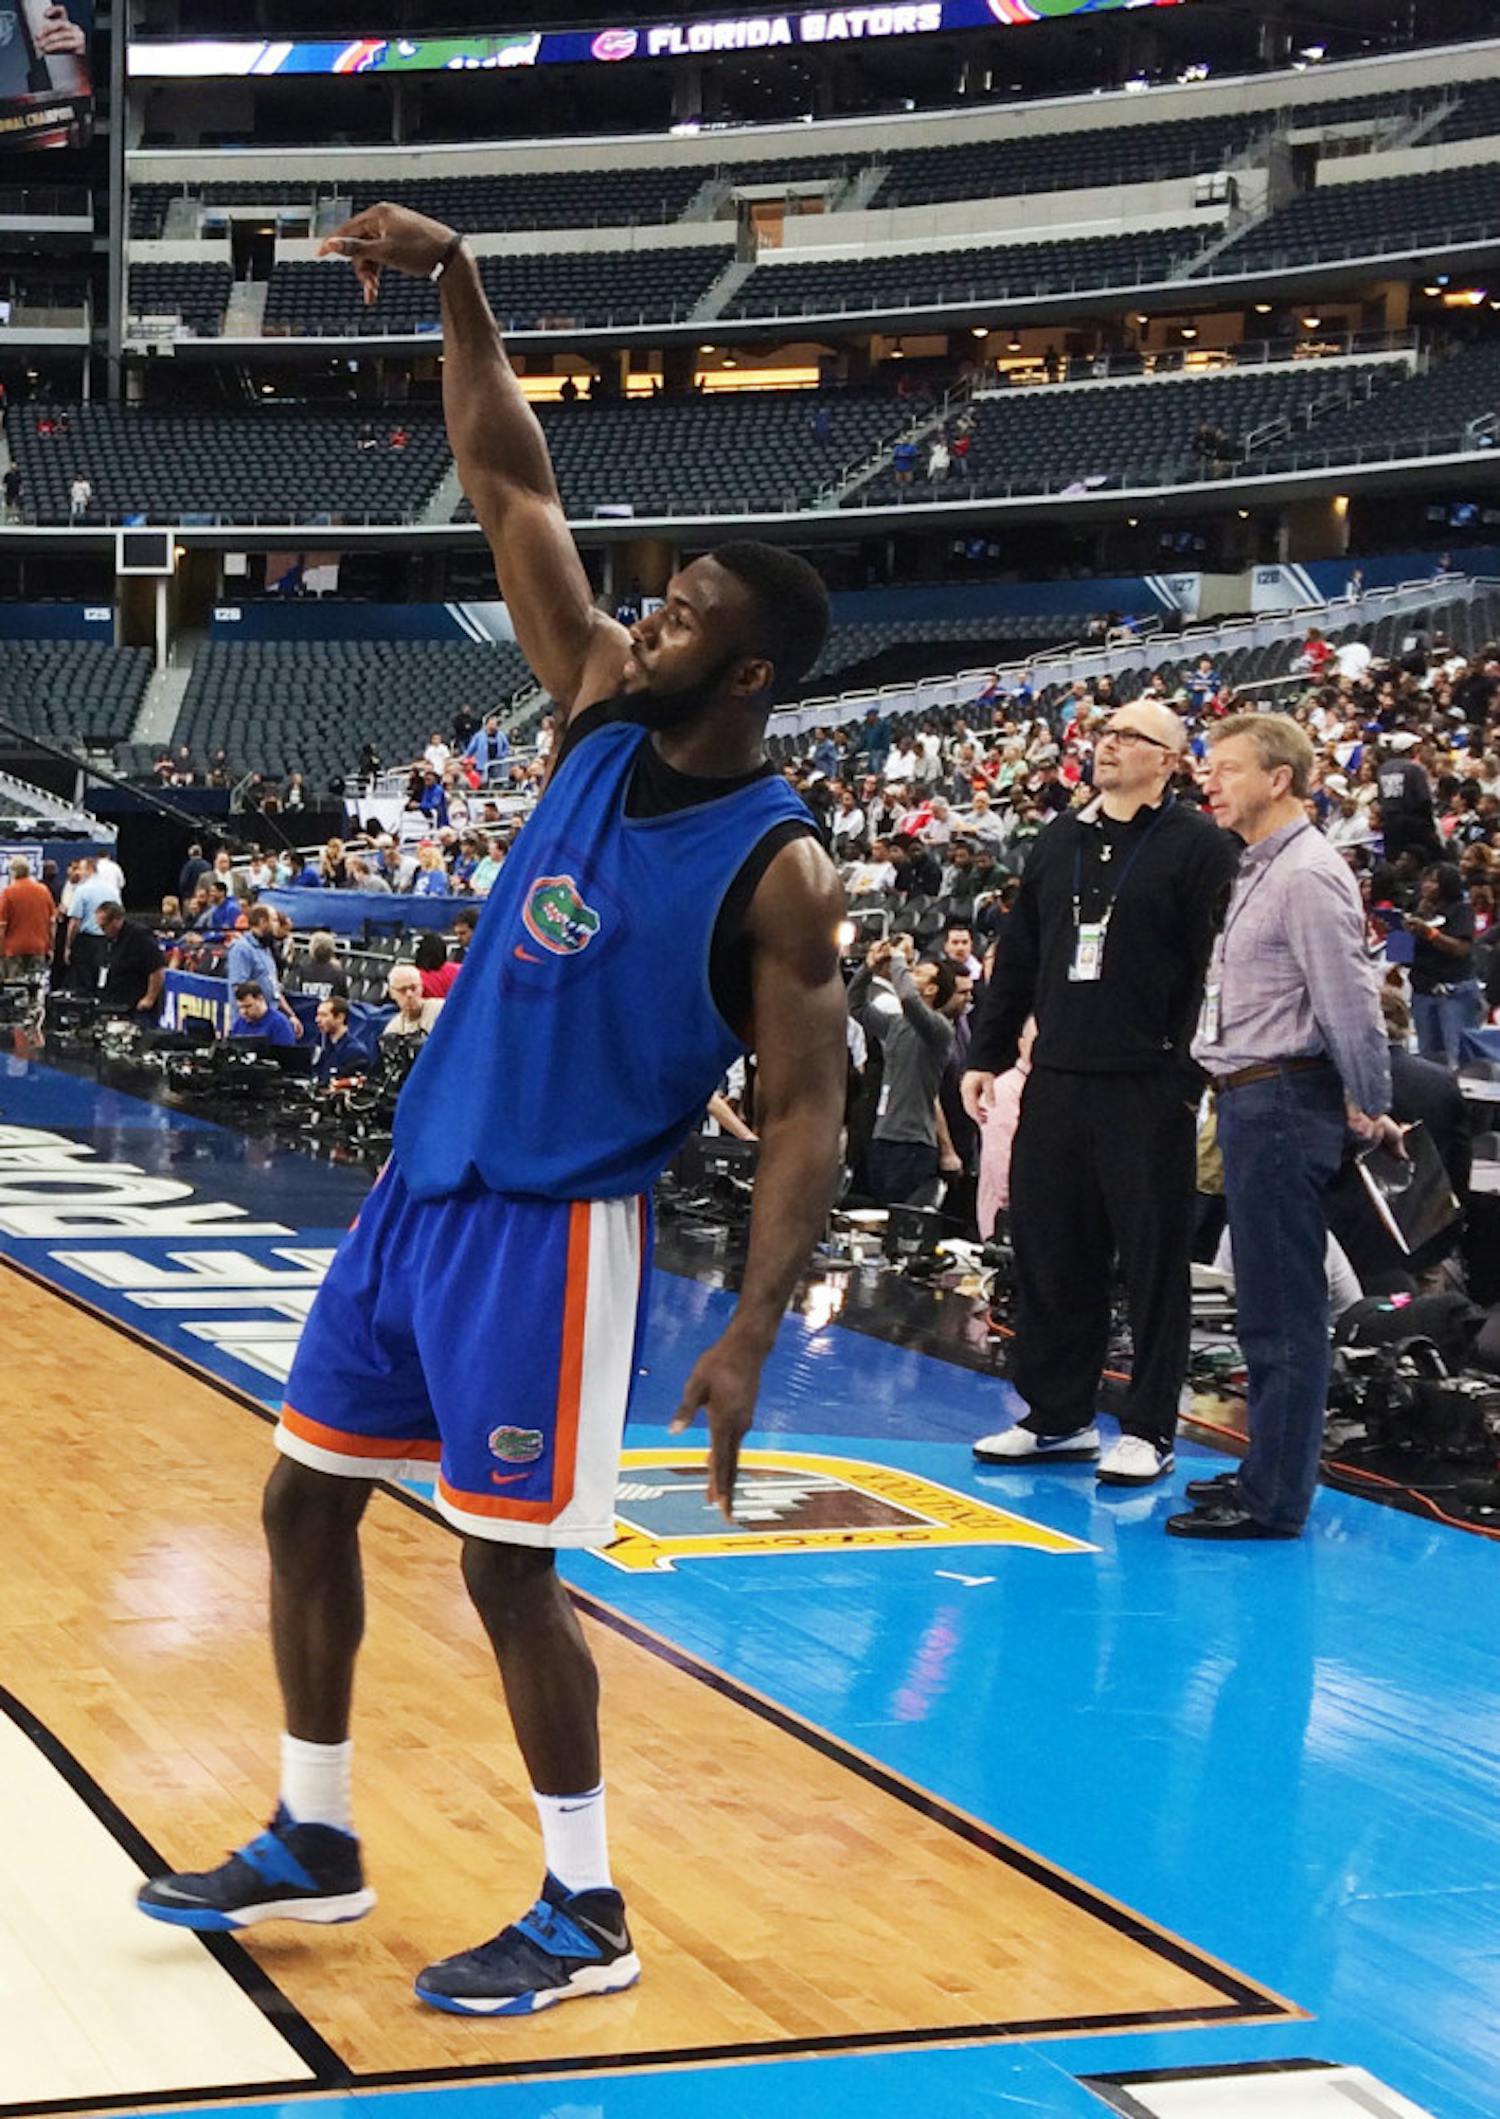 Senior center Patric Young holds his release after attempting a rare three-pointer during the Gators' open practice Friday afternoon in AT&amp;T Stadium in Arlington, Texas.